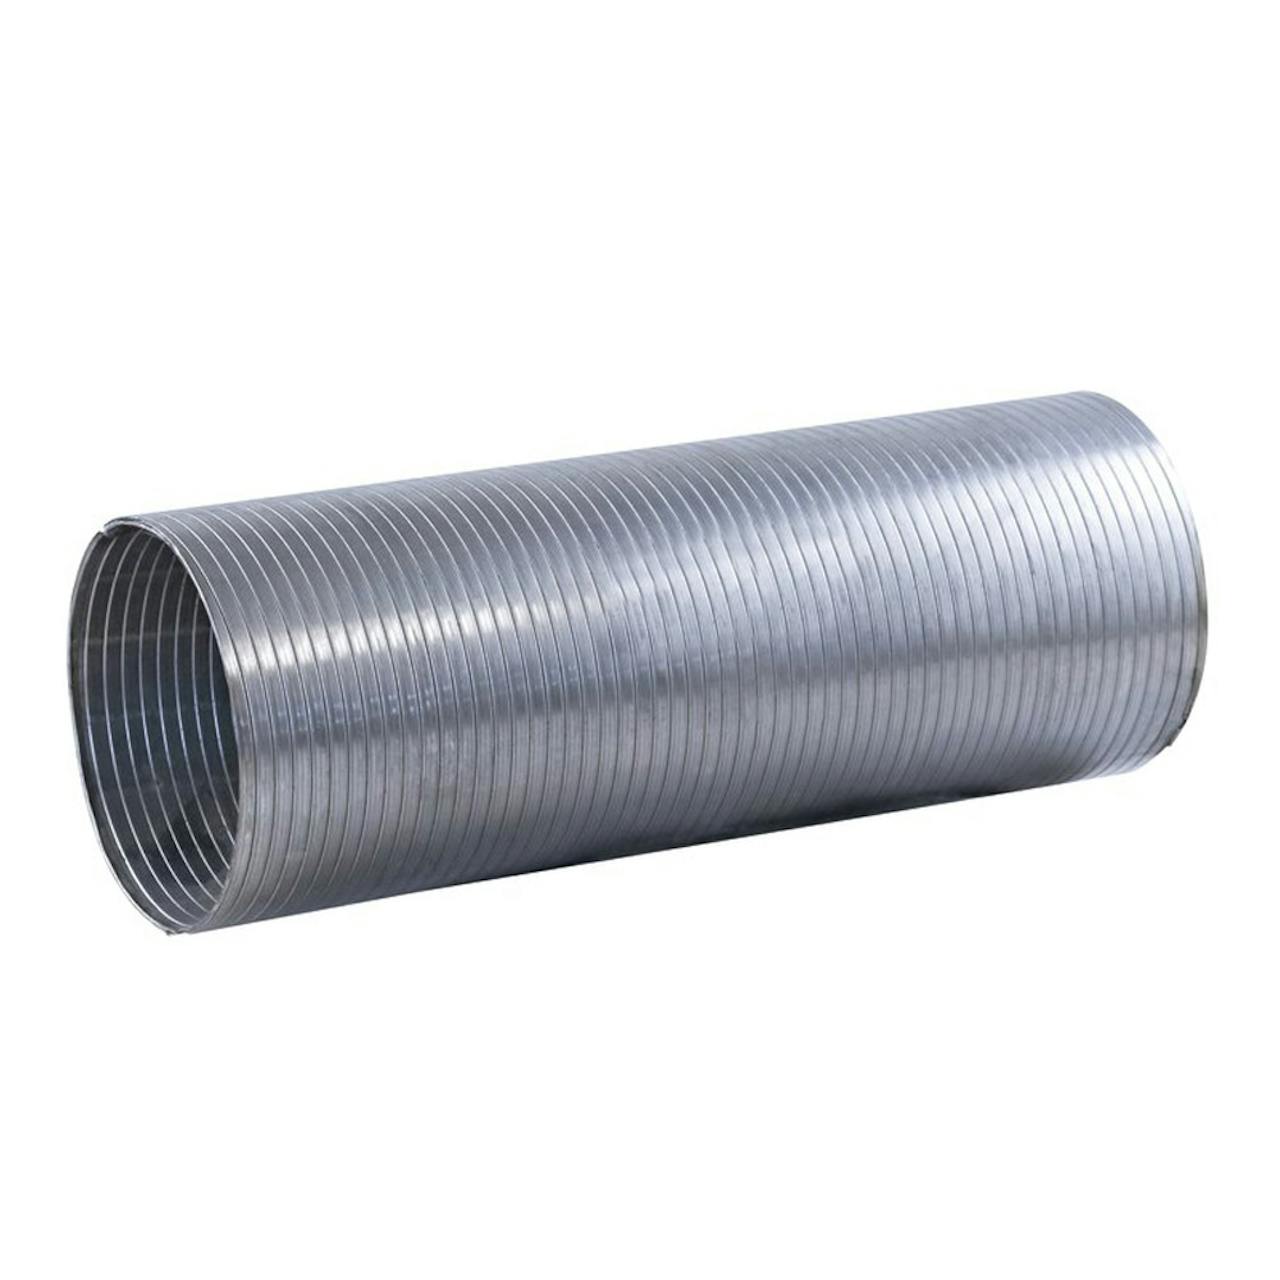 3 x 12 x 16 in. Flex Pipe Exhaust Coupling Quality Stainless